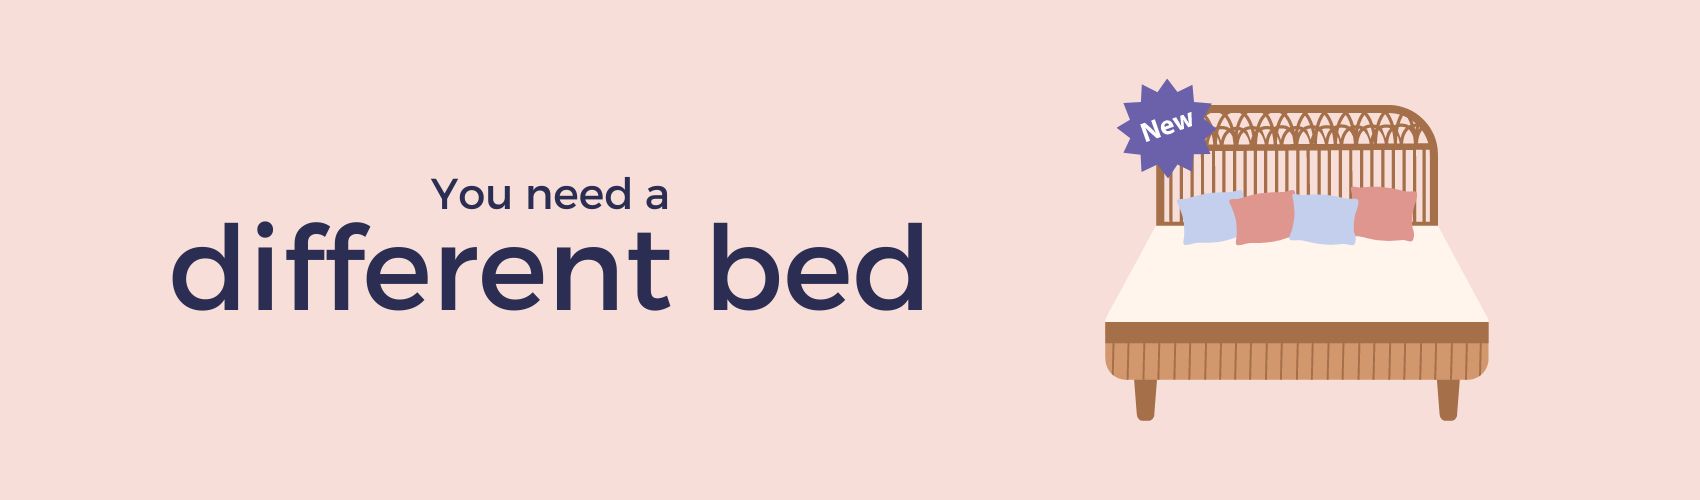 Different bed